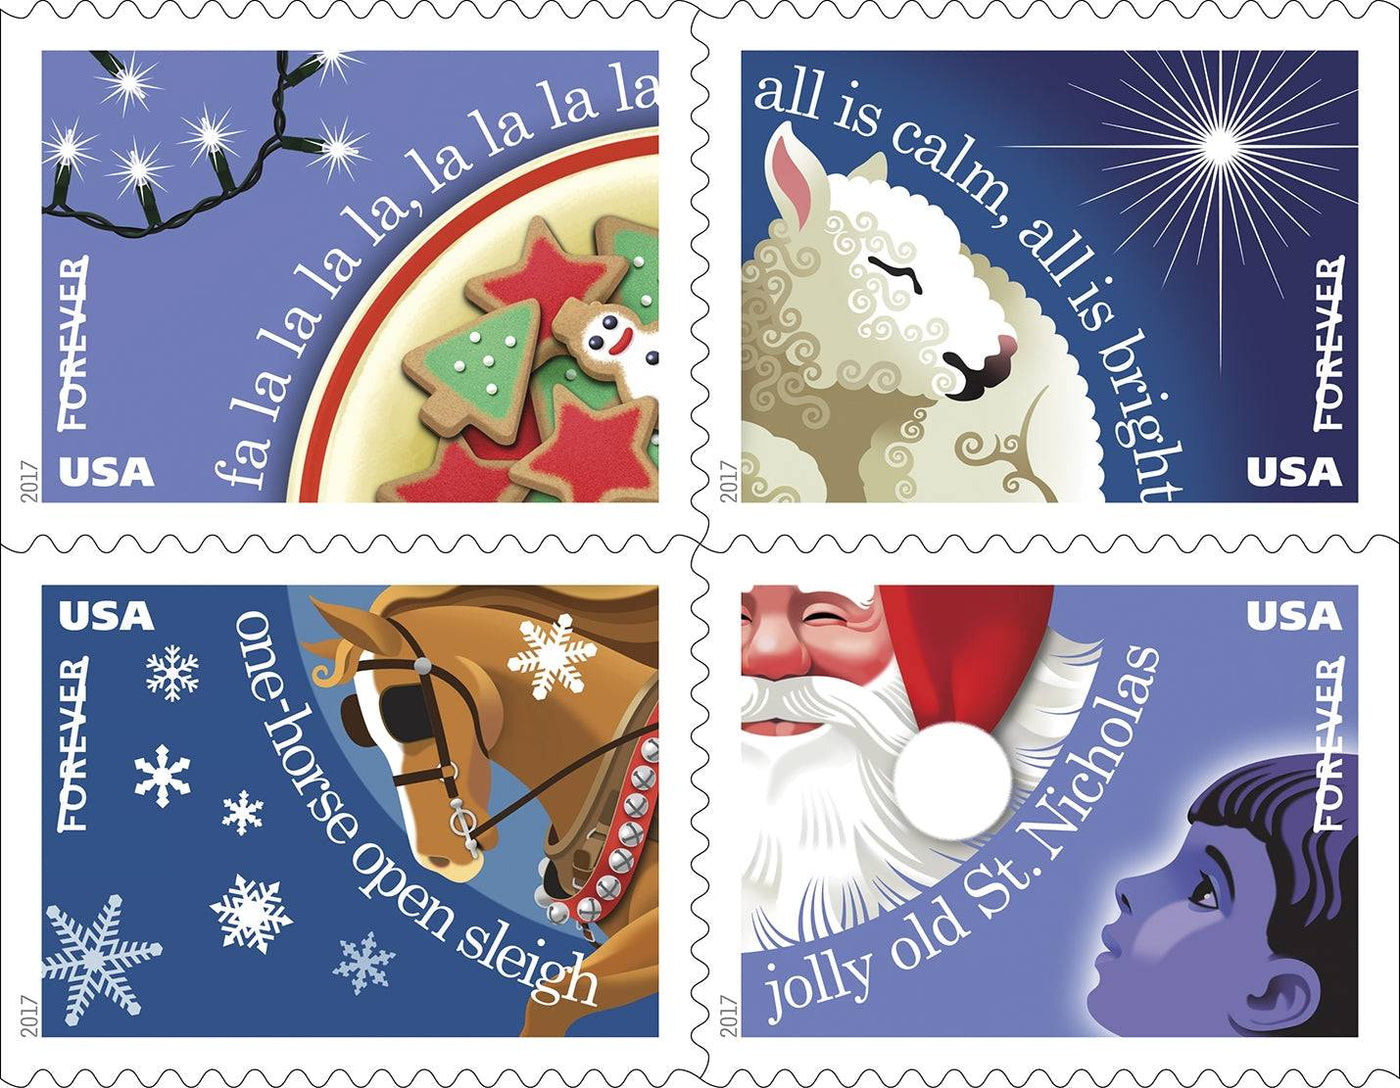 Christmas Carols Forever 1st Class Postage Stamps-LetterSeals.com